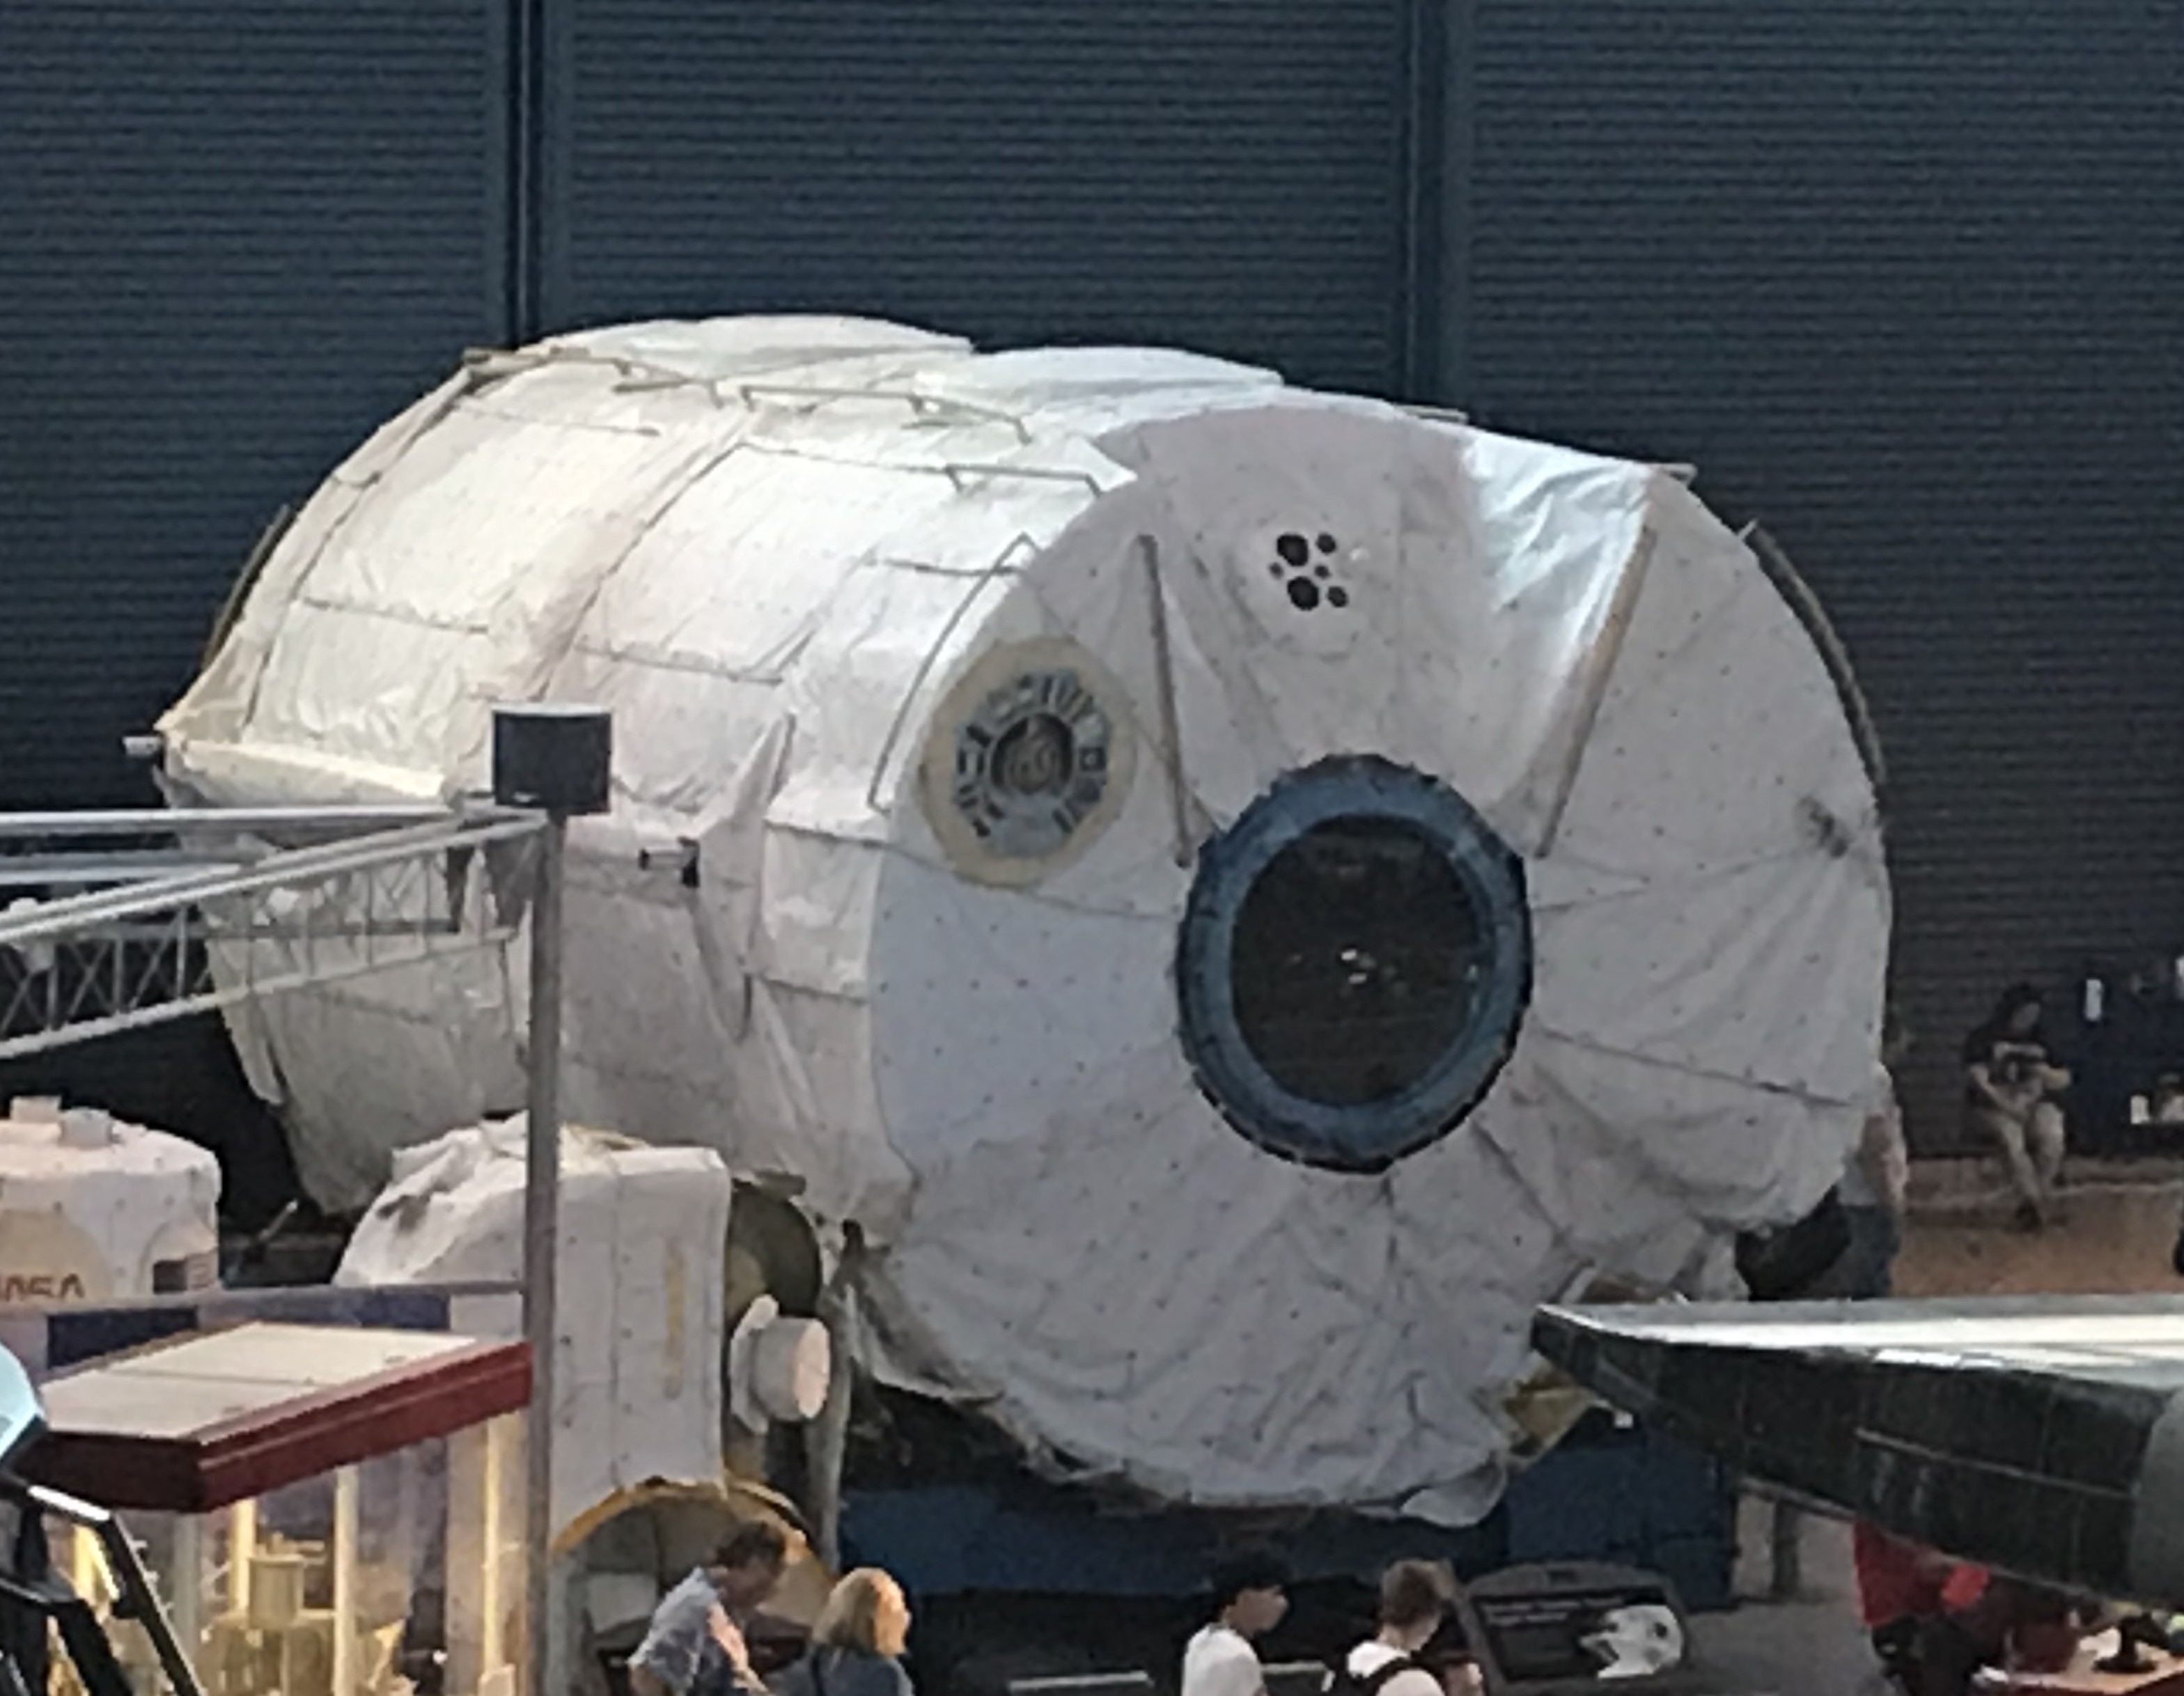 The Spacelab long module that flew on STS-65 and eight other missions on display at the Stephen F. Udvar-Hazy Center of the Smithsonian Institution's National Air and Space Museum in Chantilly, Virginia.